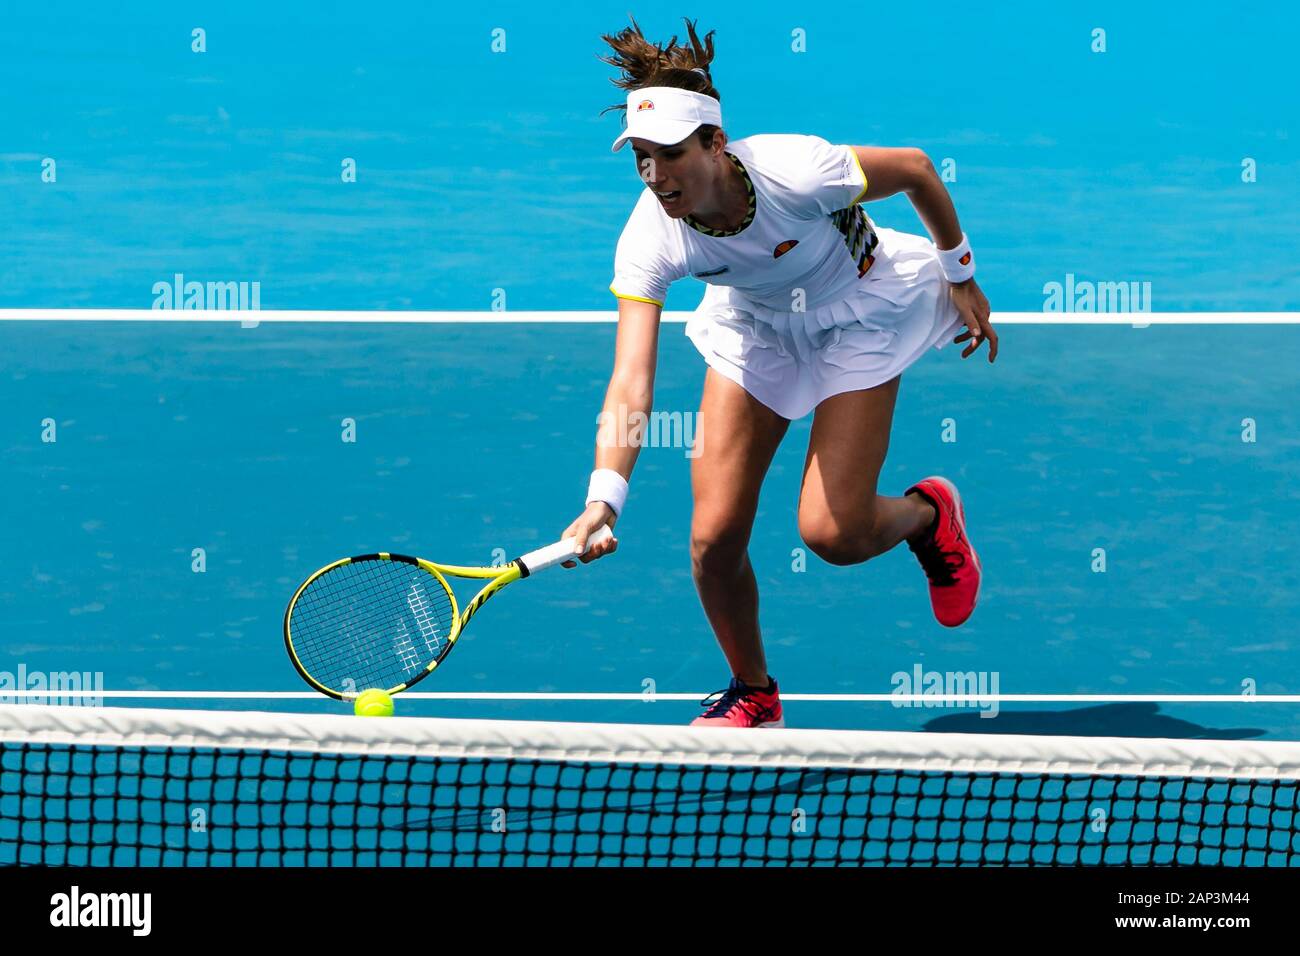 Melbourne, Australia. 21st Jan, 2020. Johanna Konta from Great Britain is  in action during her 1st round match at the 2020 Australian Open Grand Slam  tennis tournament in Melbourne, Australia. Frank Molter/Alamy